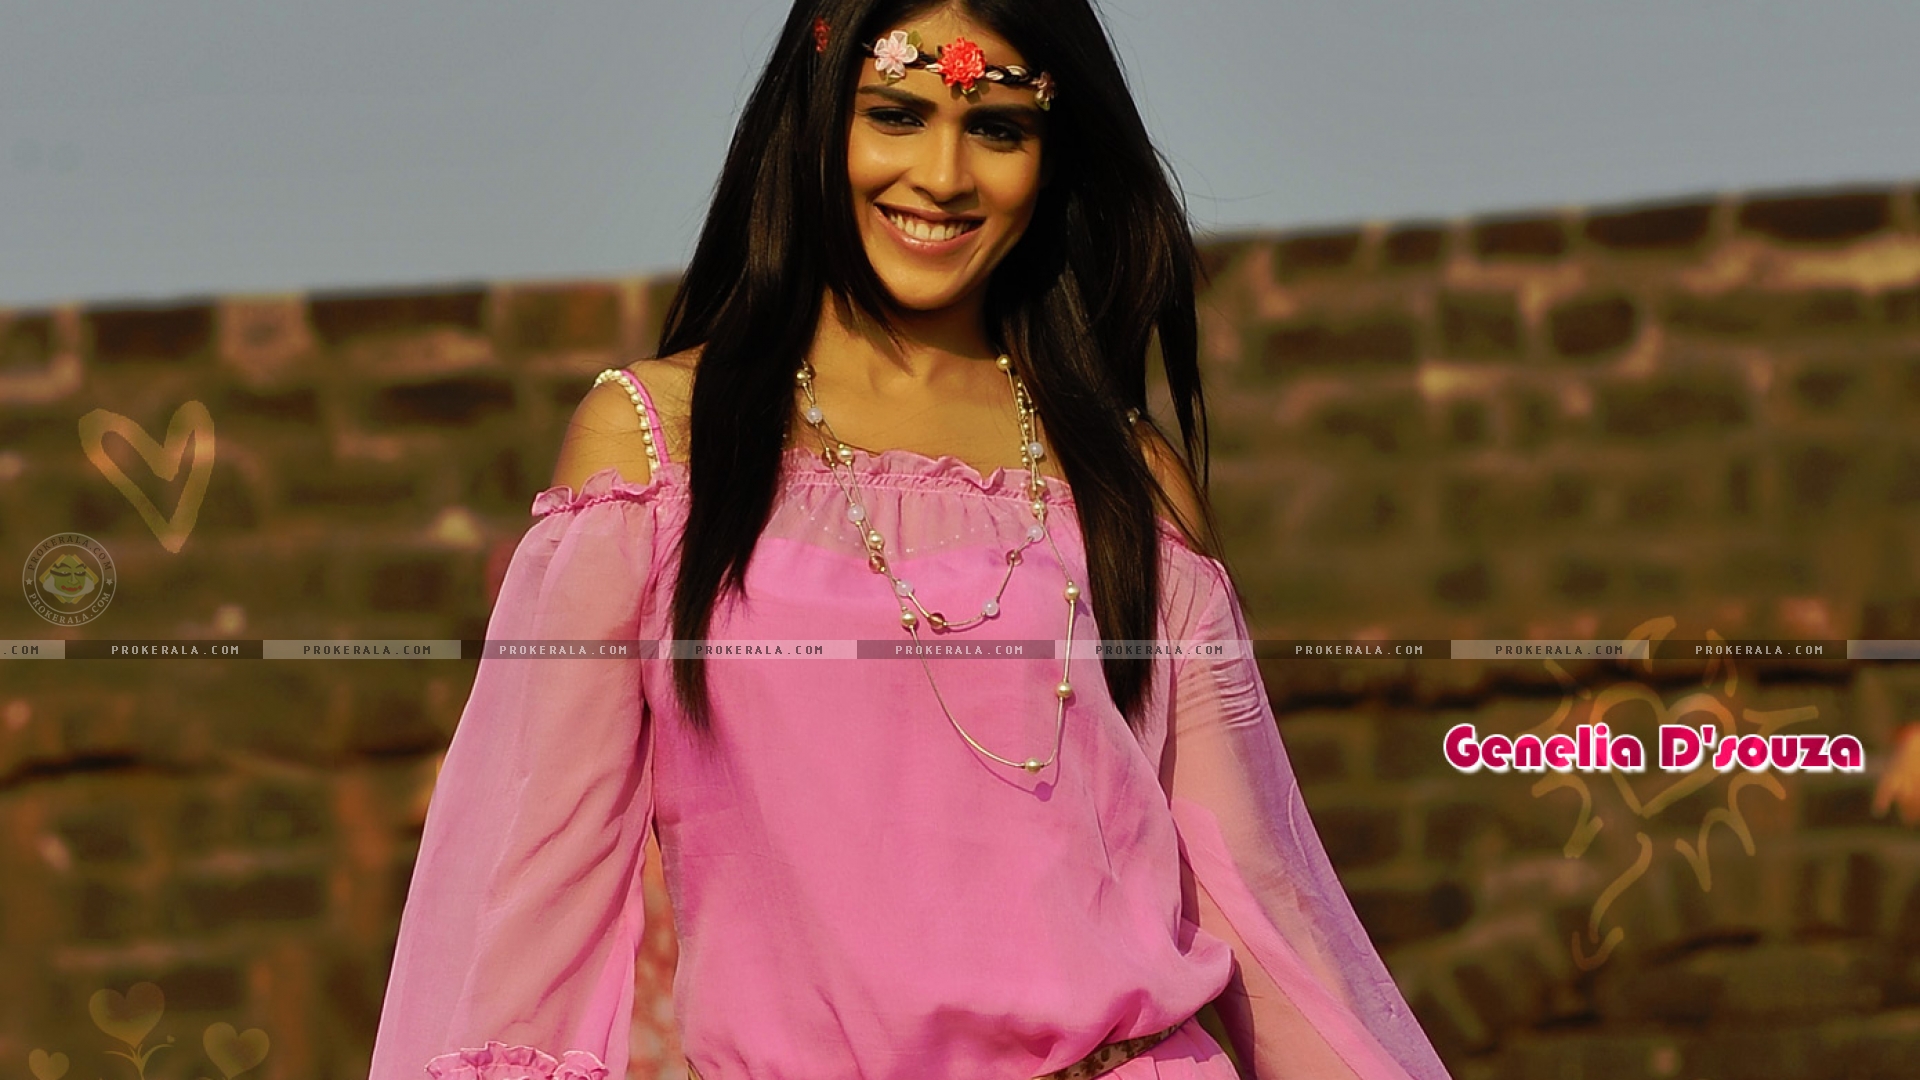 Genelia D'souza Wallpapers | High Quality Wallpapers of Actress ...